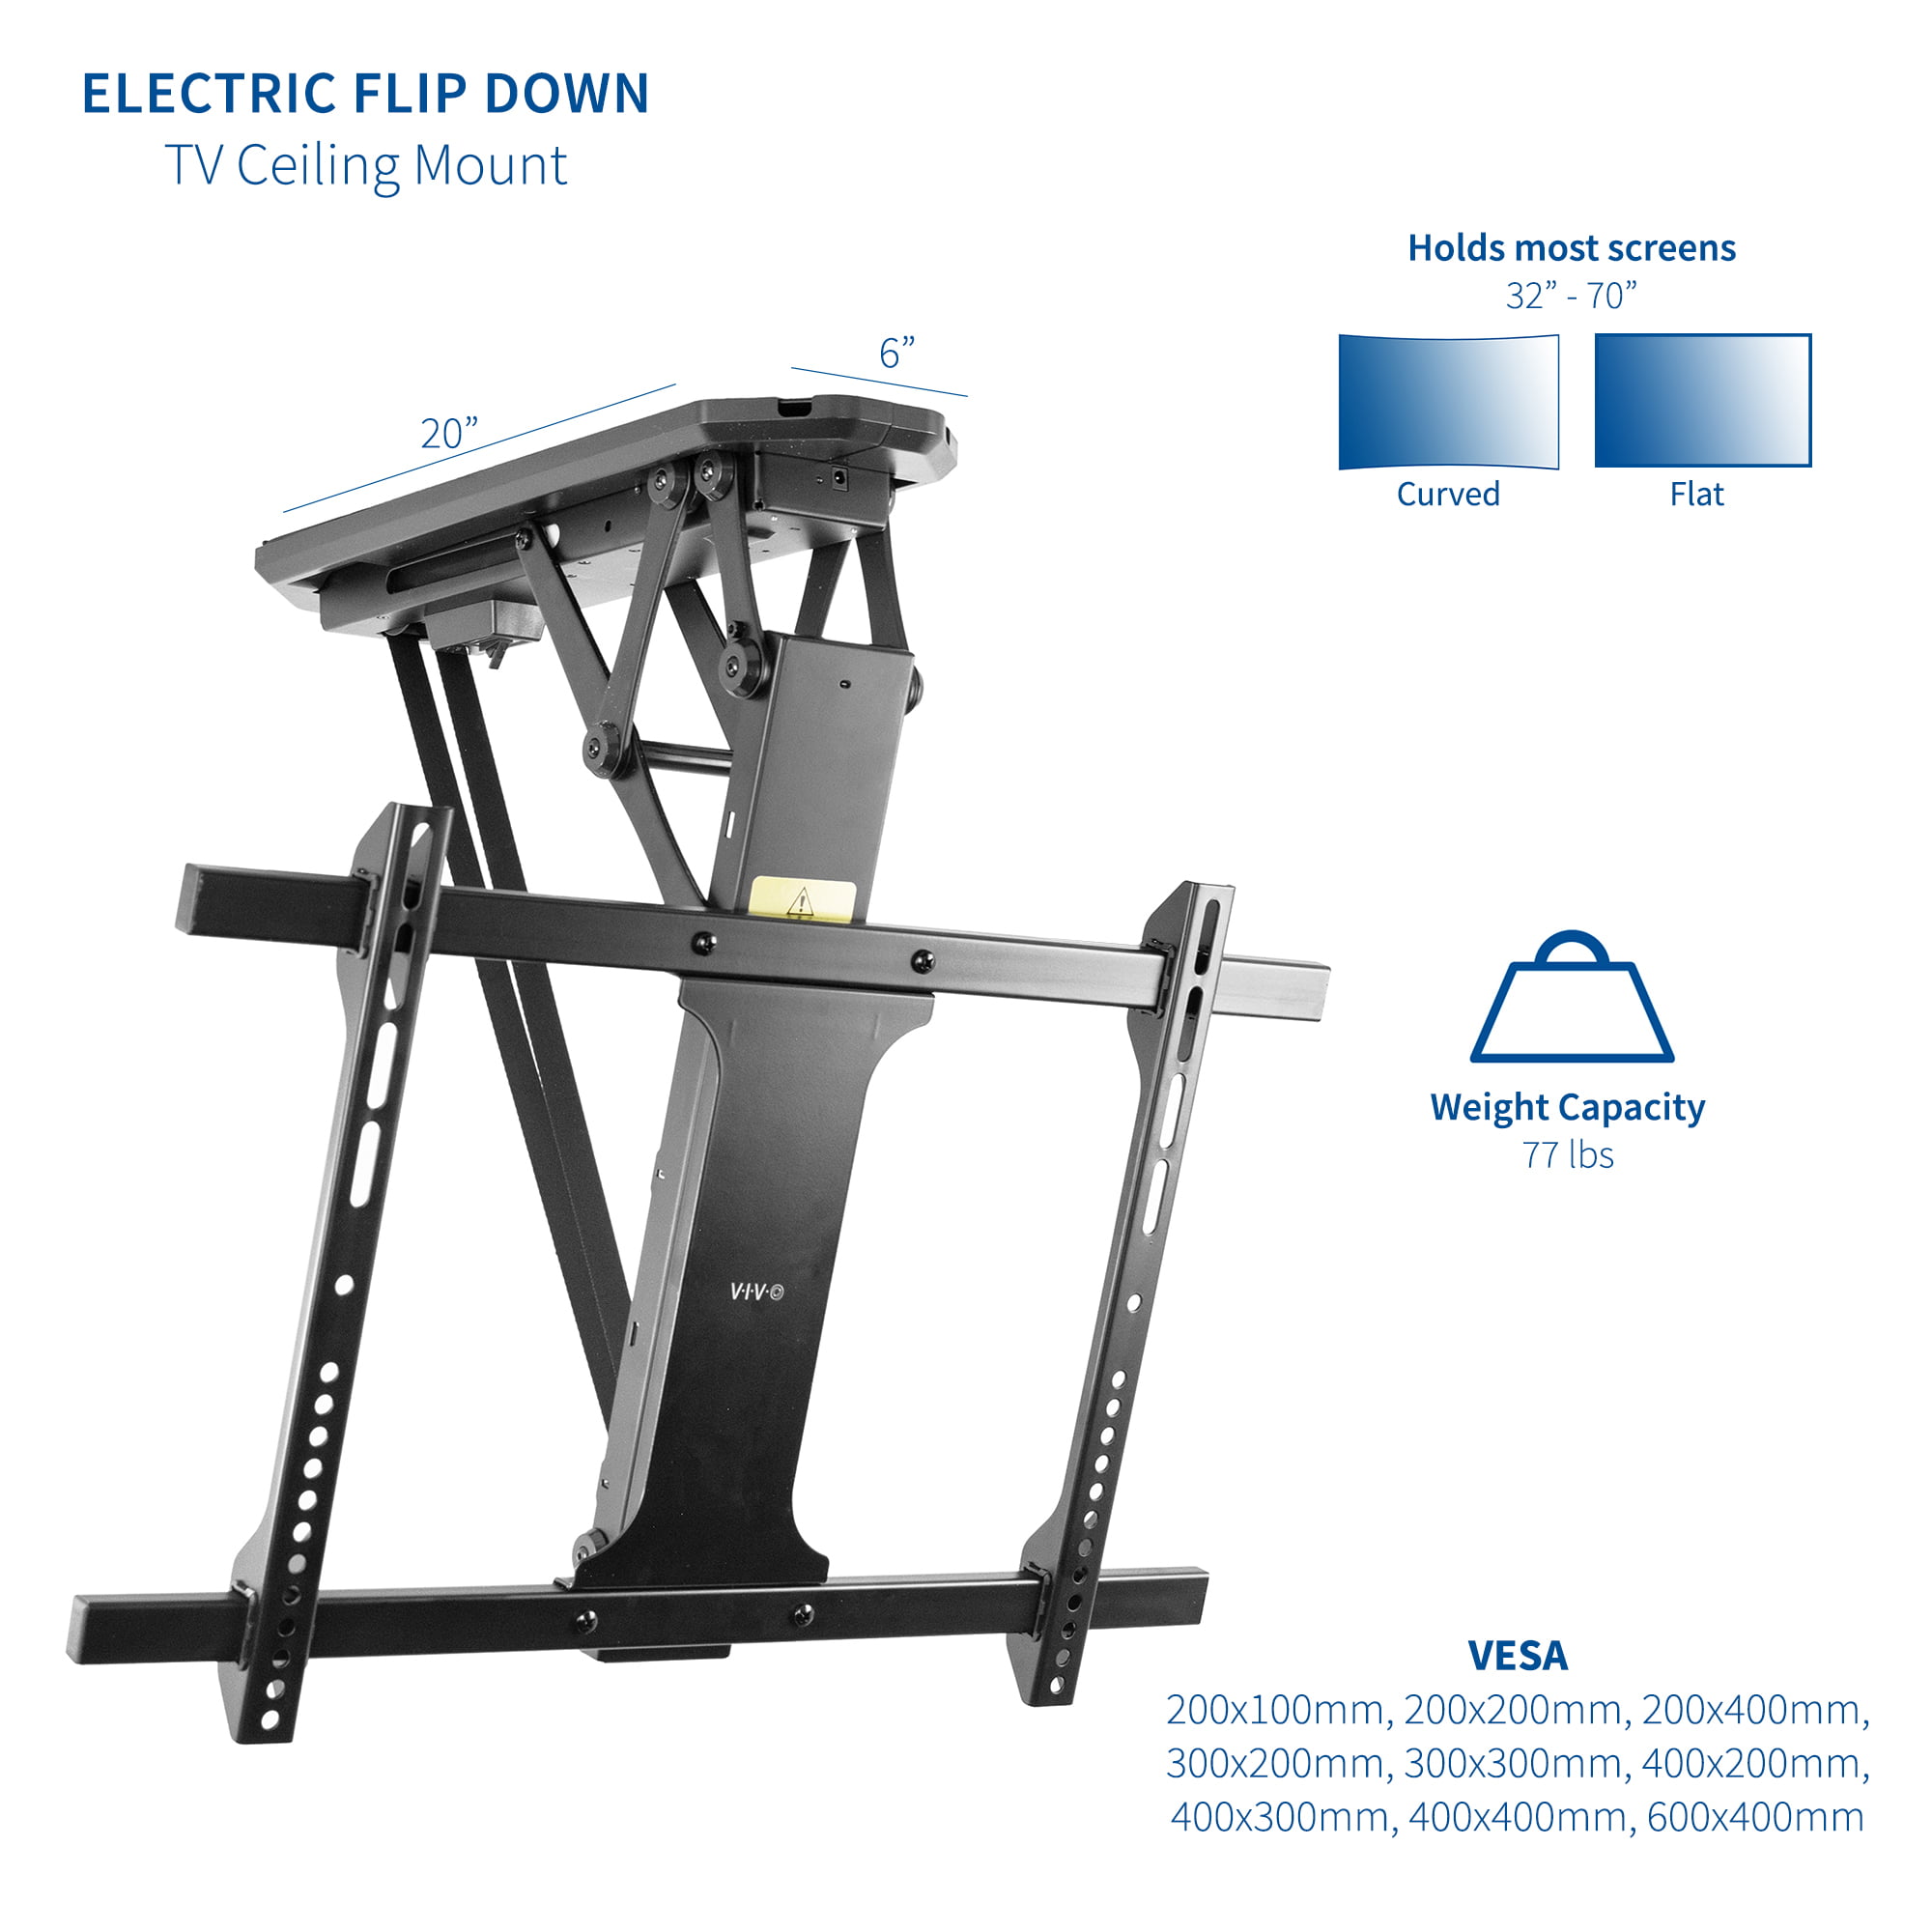 Electric Motorized Flip Down Pitched Roof Ceiling TV Mount for 32" Screen -